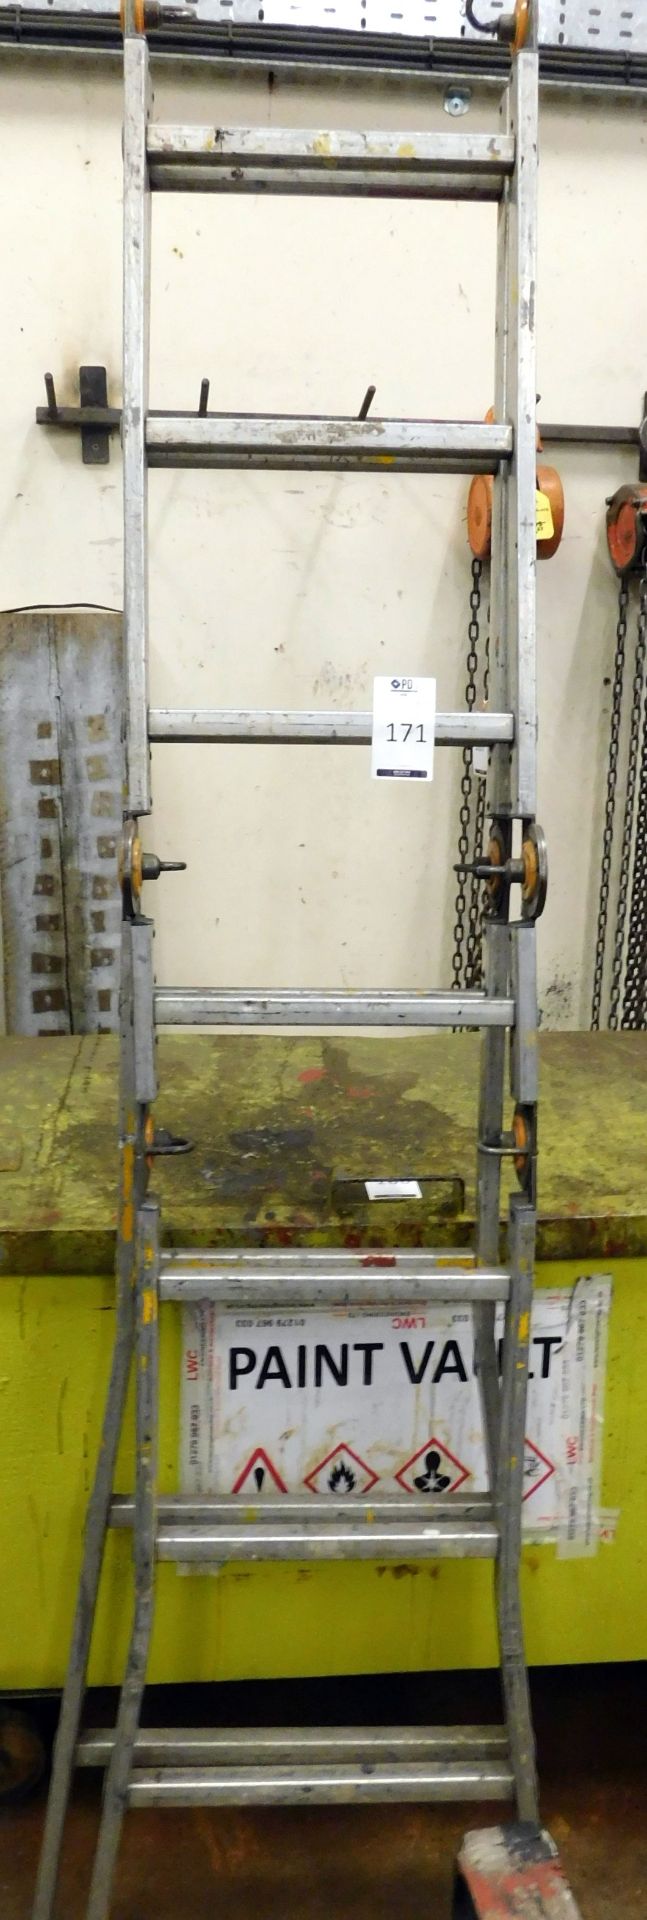 Folding Aluminium Work Ladders (Location Harlow. Please Refer to General Notes)